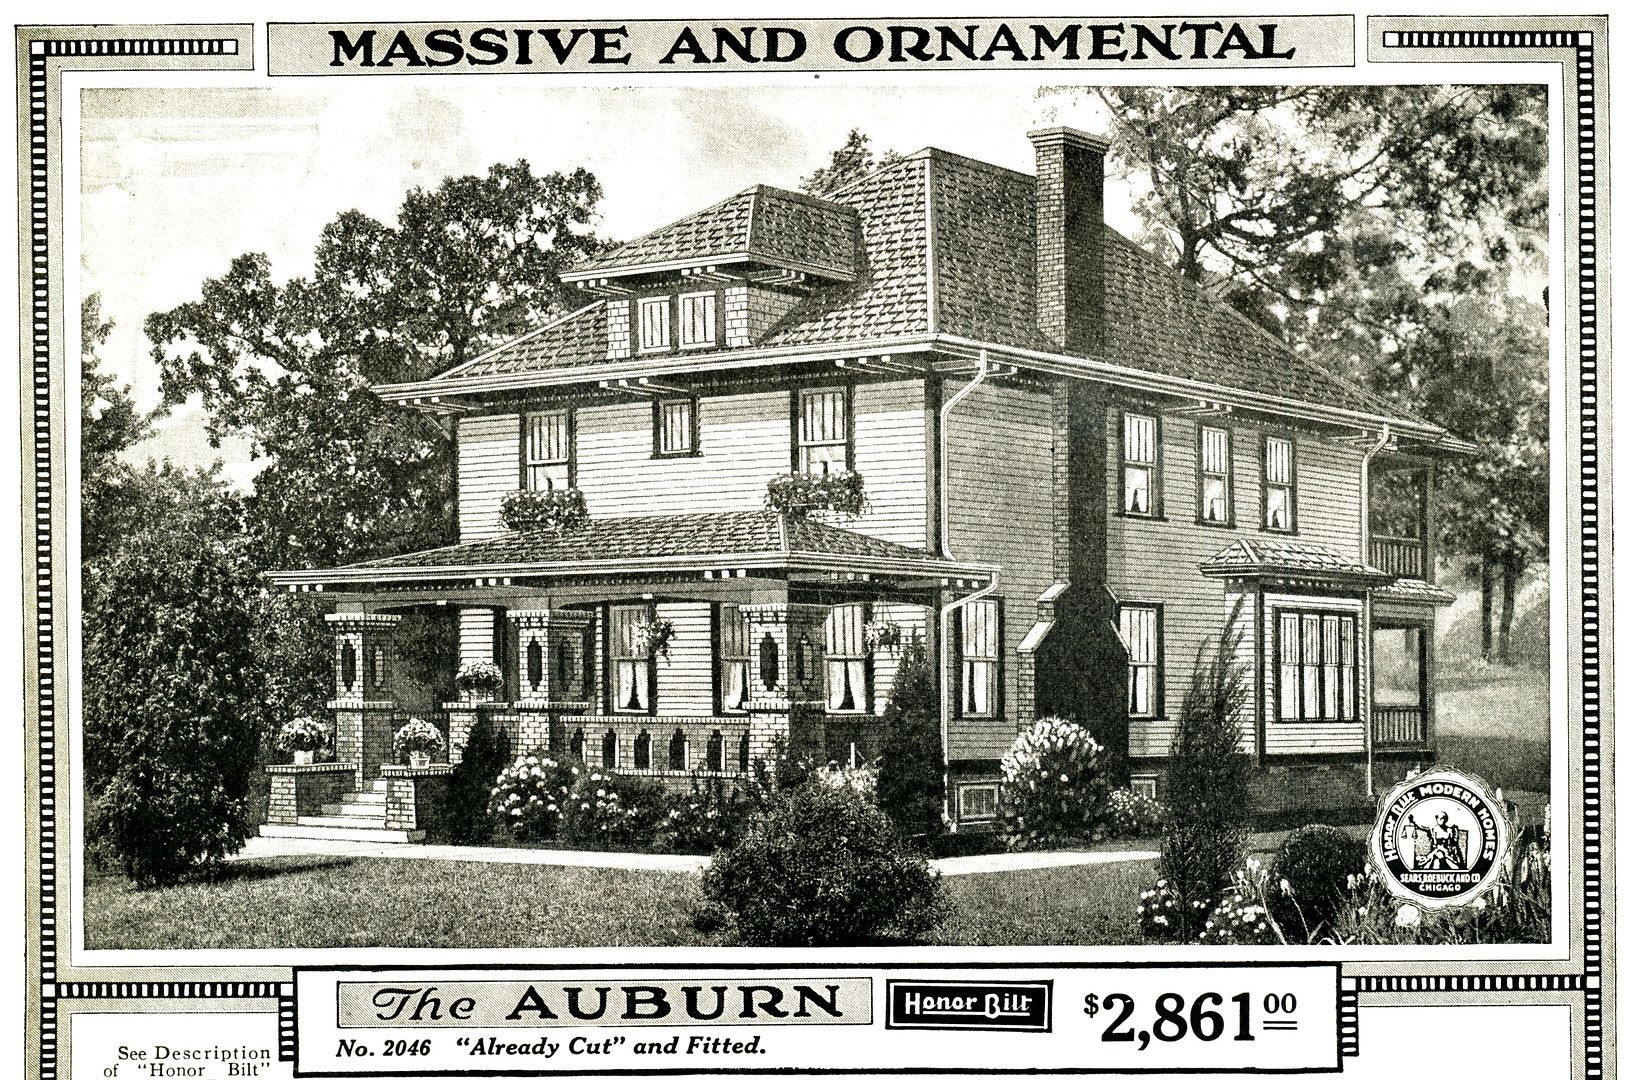 The Sears Auburn is another unusual house. This is a massive house with lots of interesting details. 